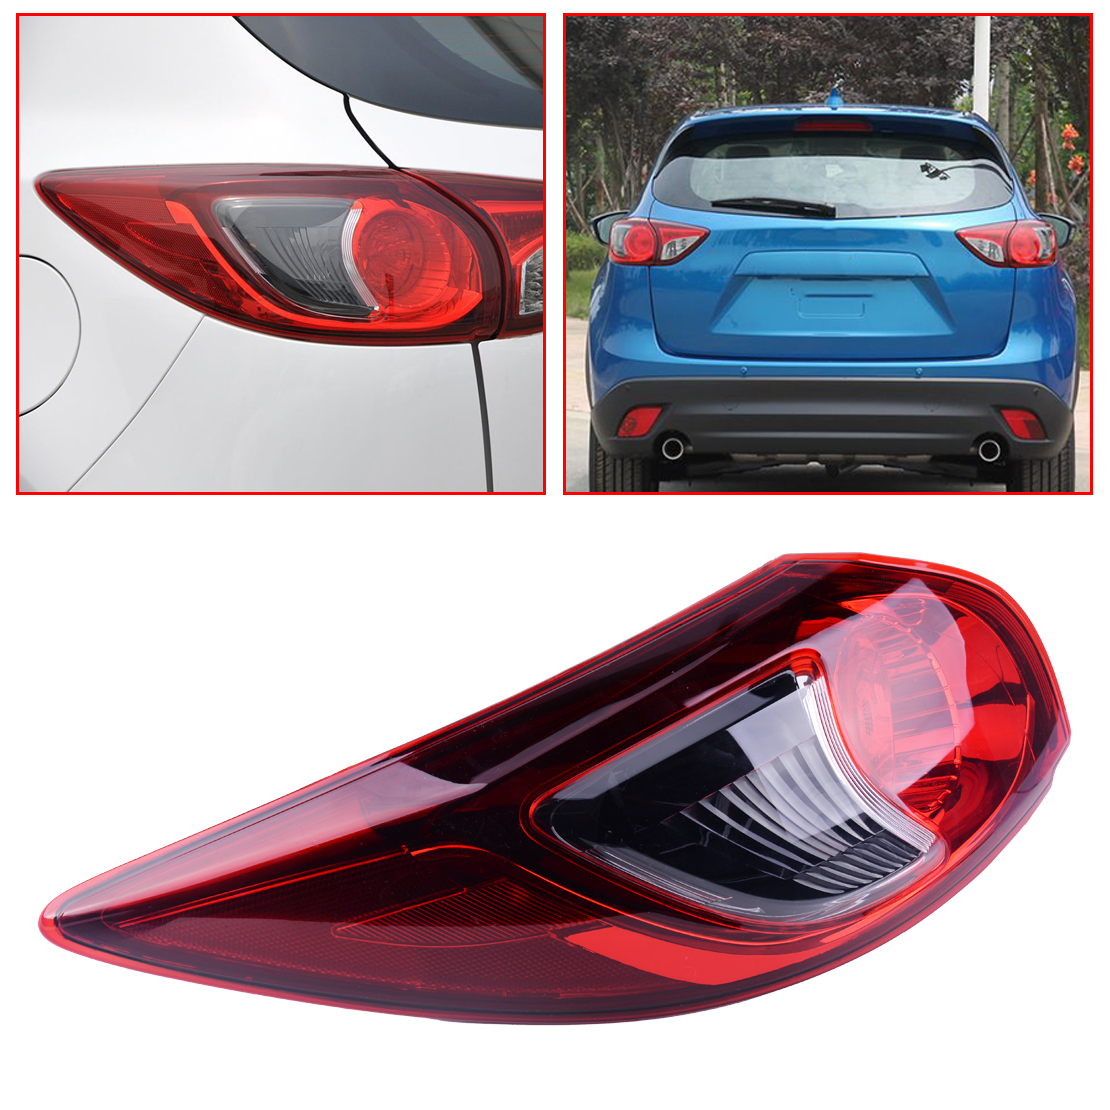 Fit For Mazda CX5 CX-5 2013 2014 2015 2016 Rear Left Outer Tail Light Brake Lamp